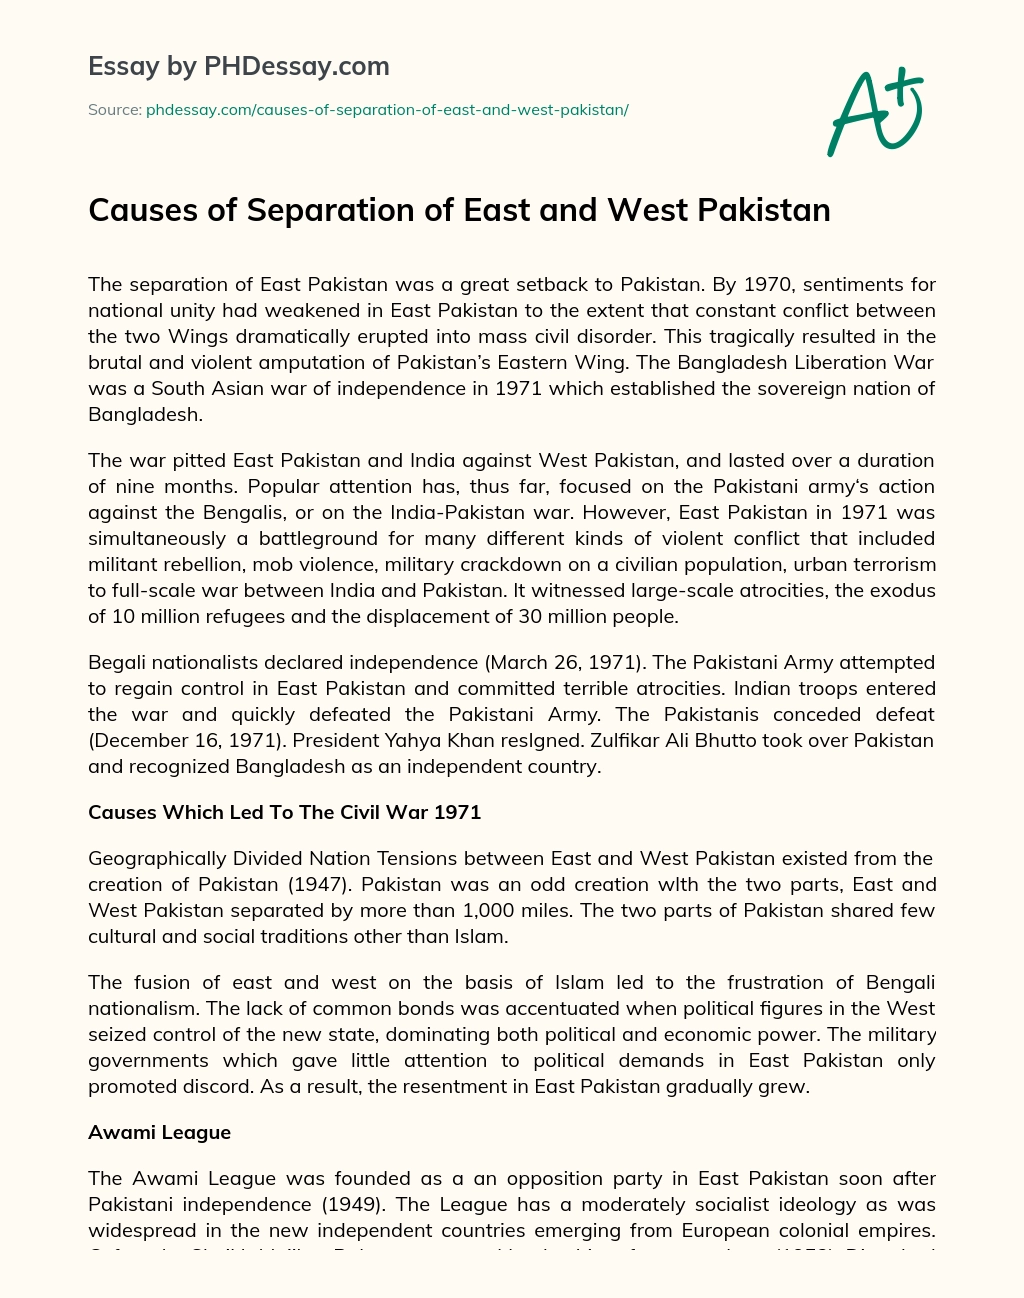 Causes of Separation of East and West Pakistan essay